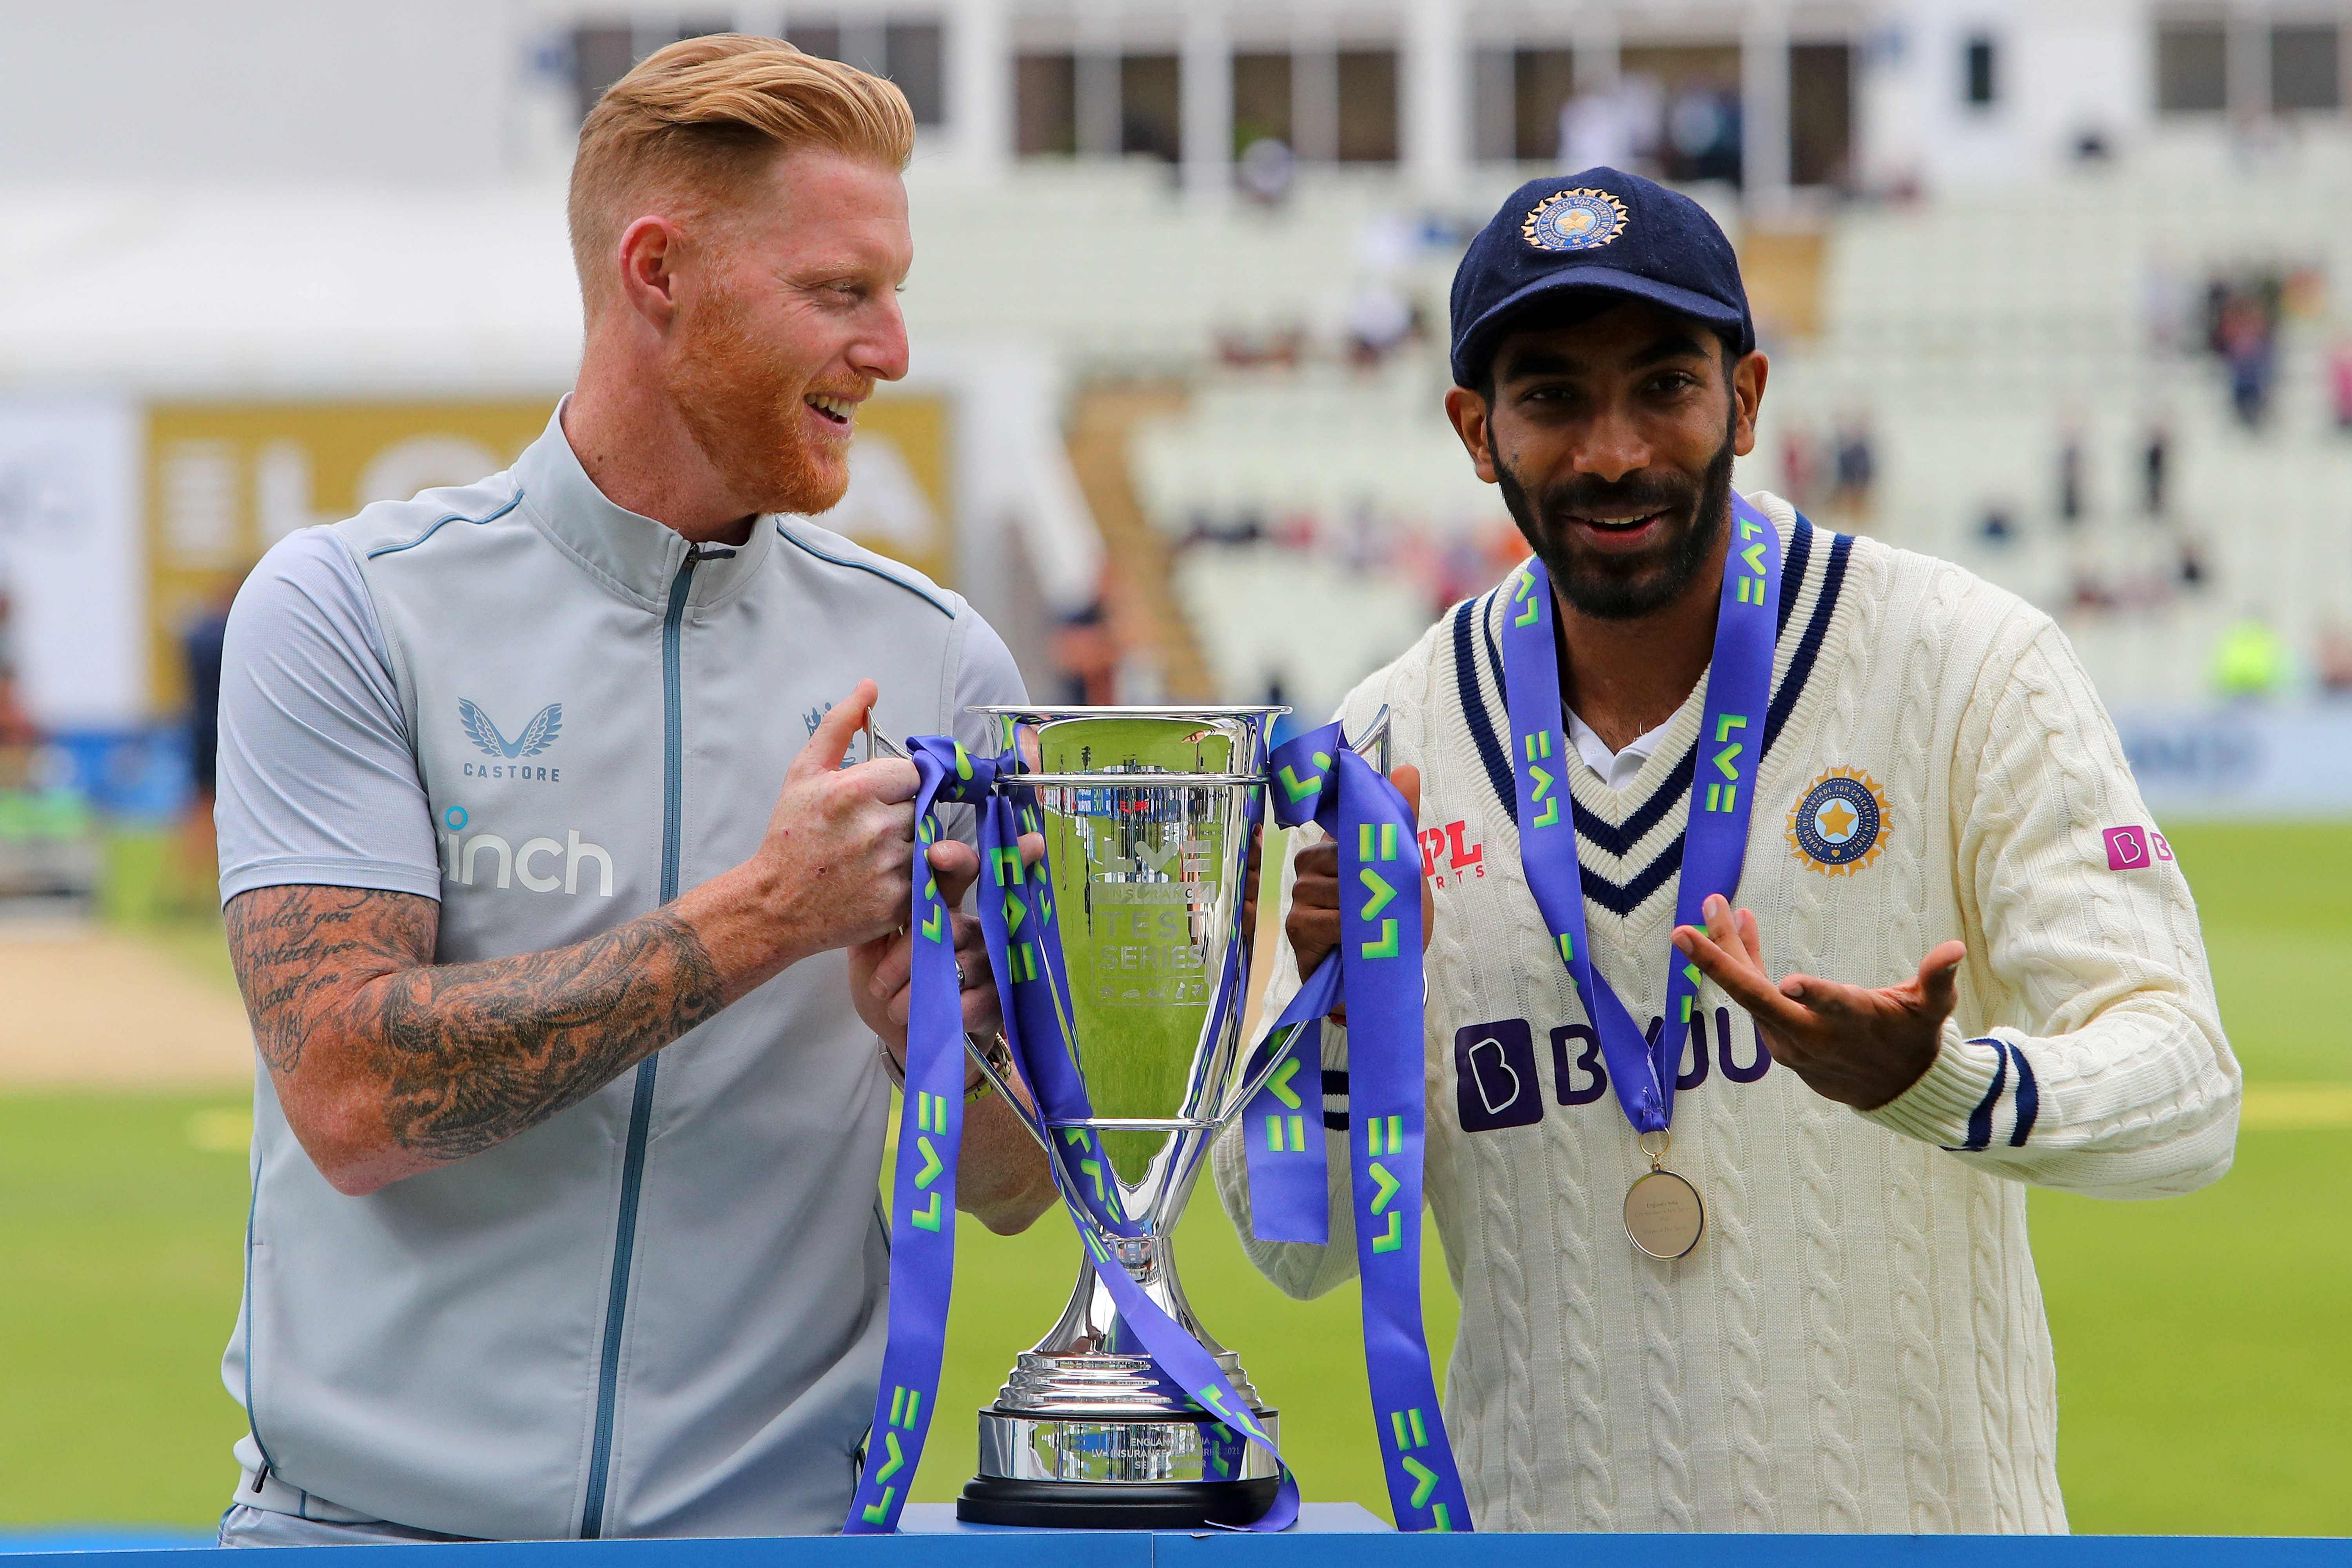 England's captain Ben Stokes (L) and India's Jasprit Bumrah (R) pose with the LV trophy after England won on Day 5 of the fifth cricket Test match between England and India at Edgbaston, Birmingham. Credit: AFP Photo